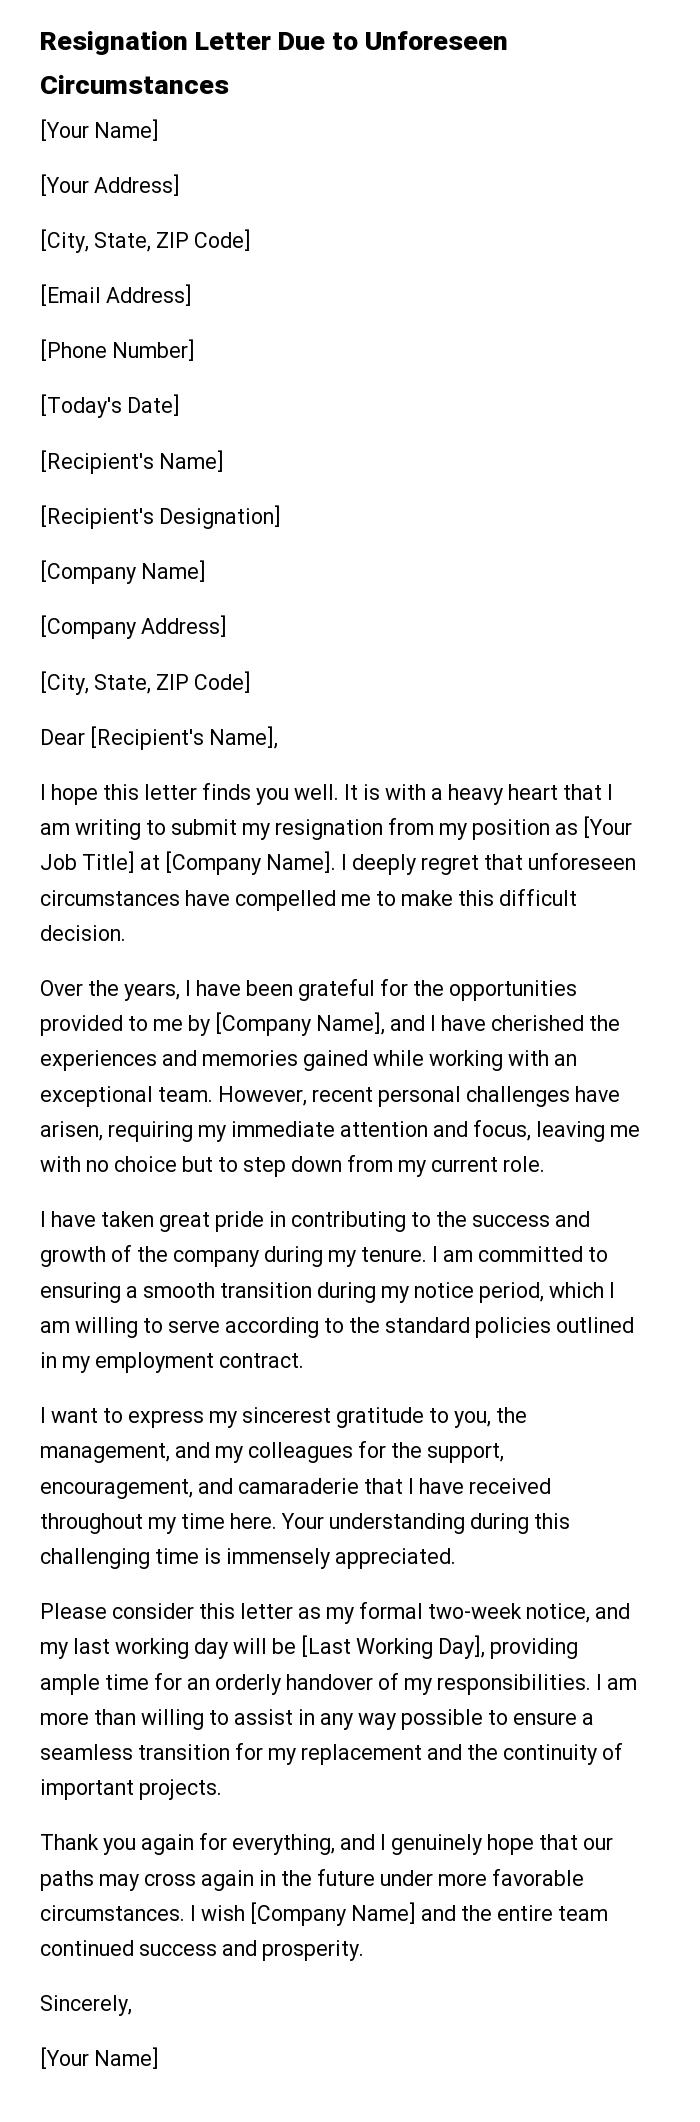 Resignation Letter Due to Unforeseen Circumstances